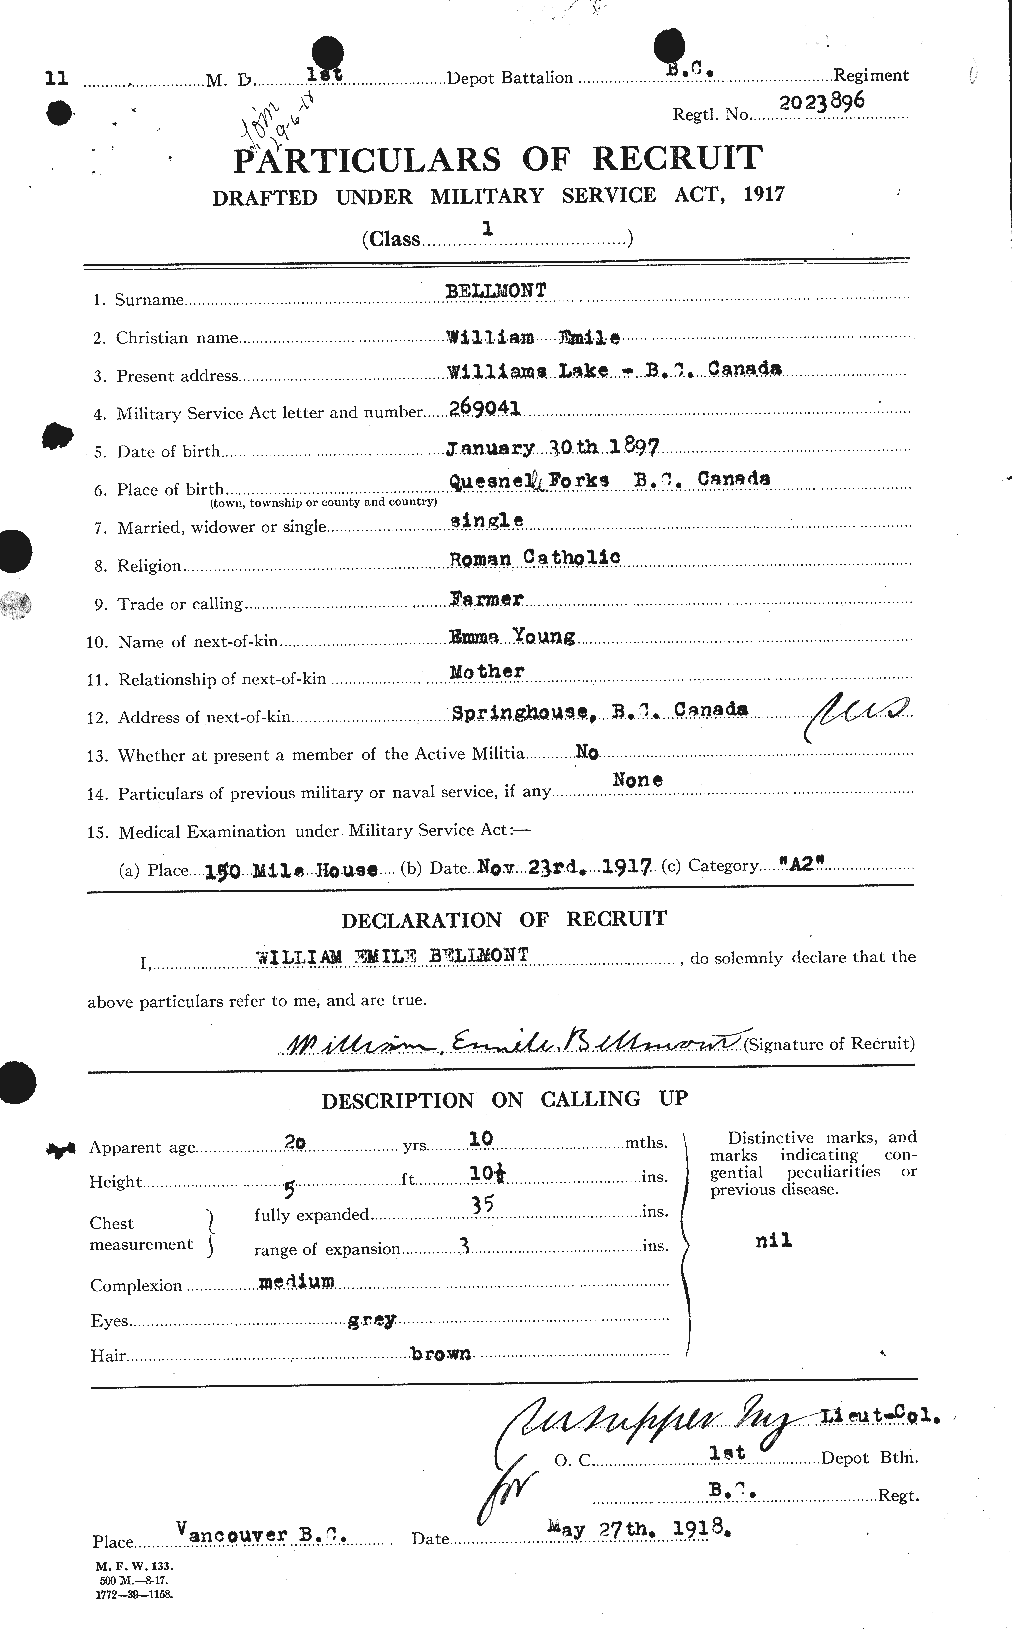 Personnel Records of the First World War - CEF 233546a